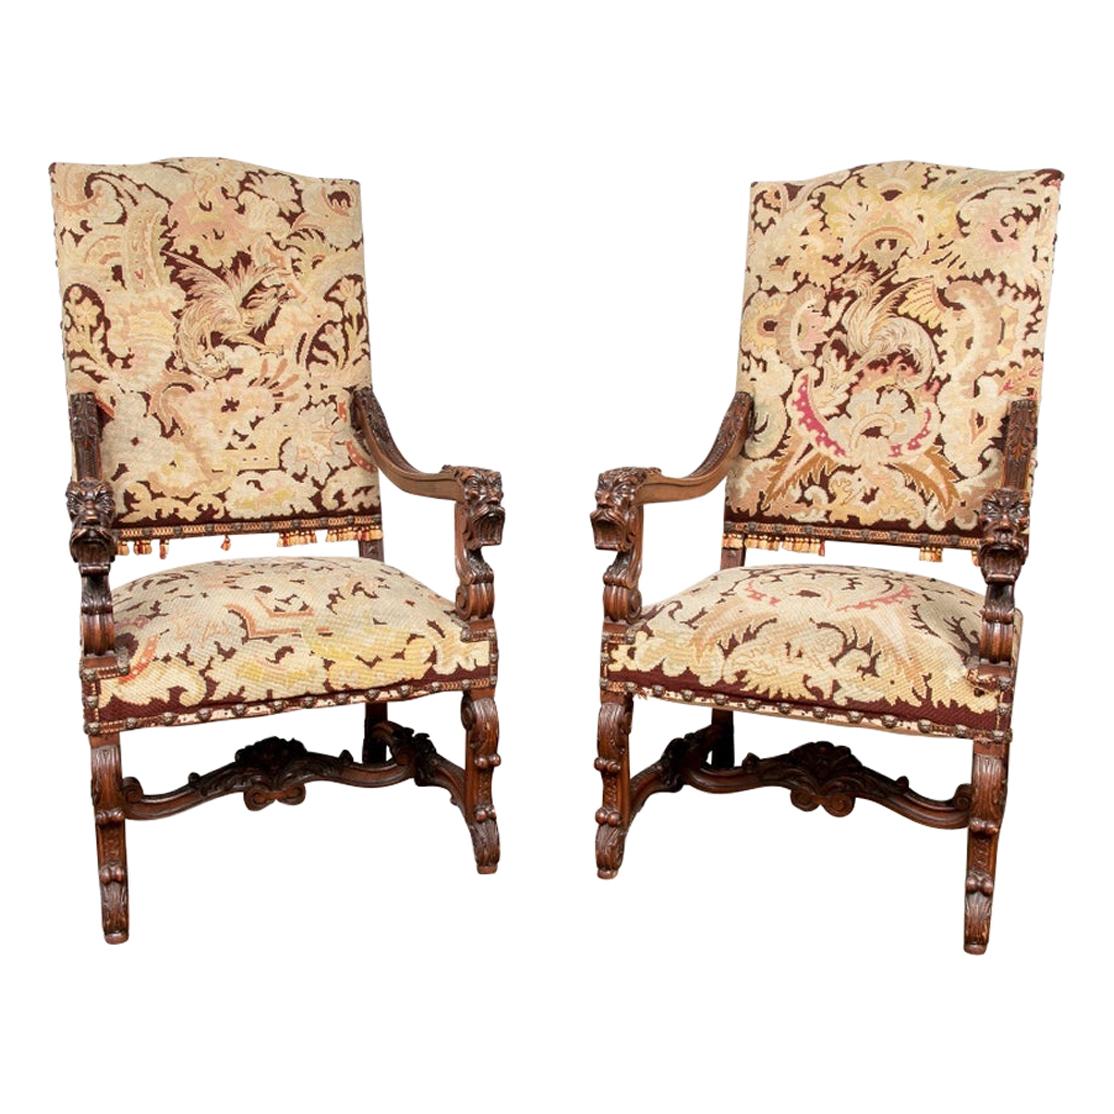 Pair of Carved Antique Hall Chairs with Tapestry Upholstery